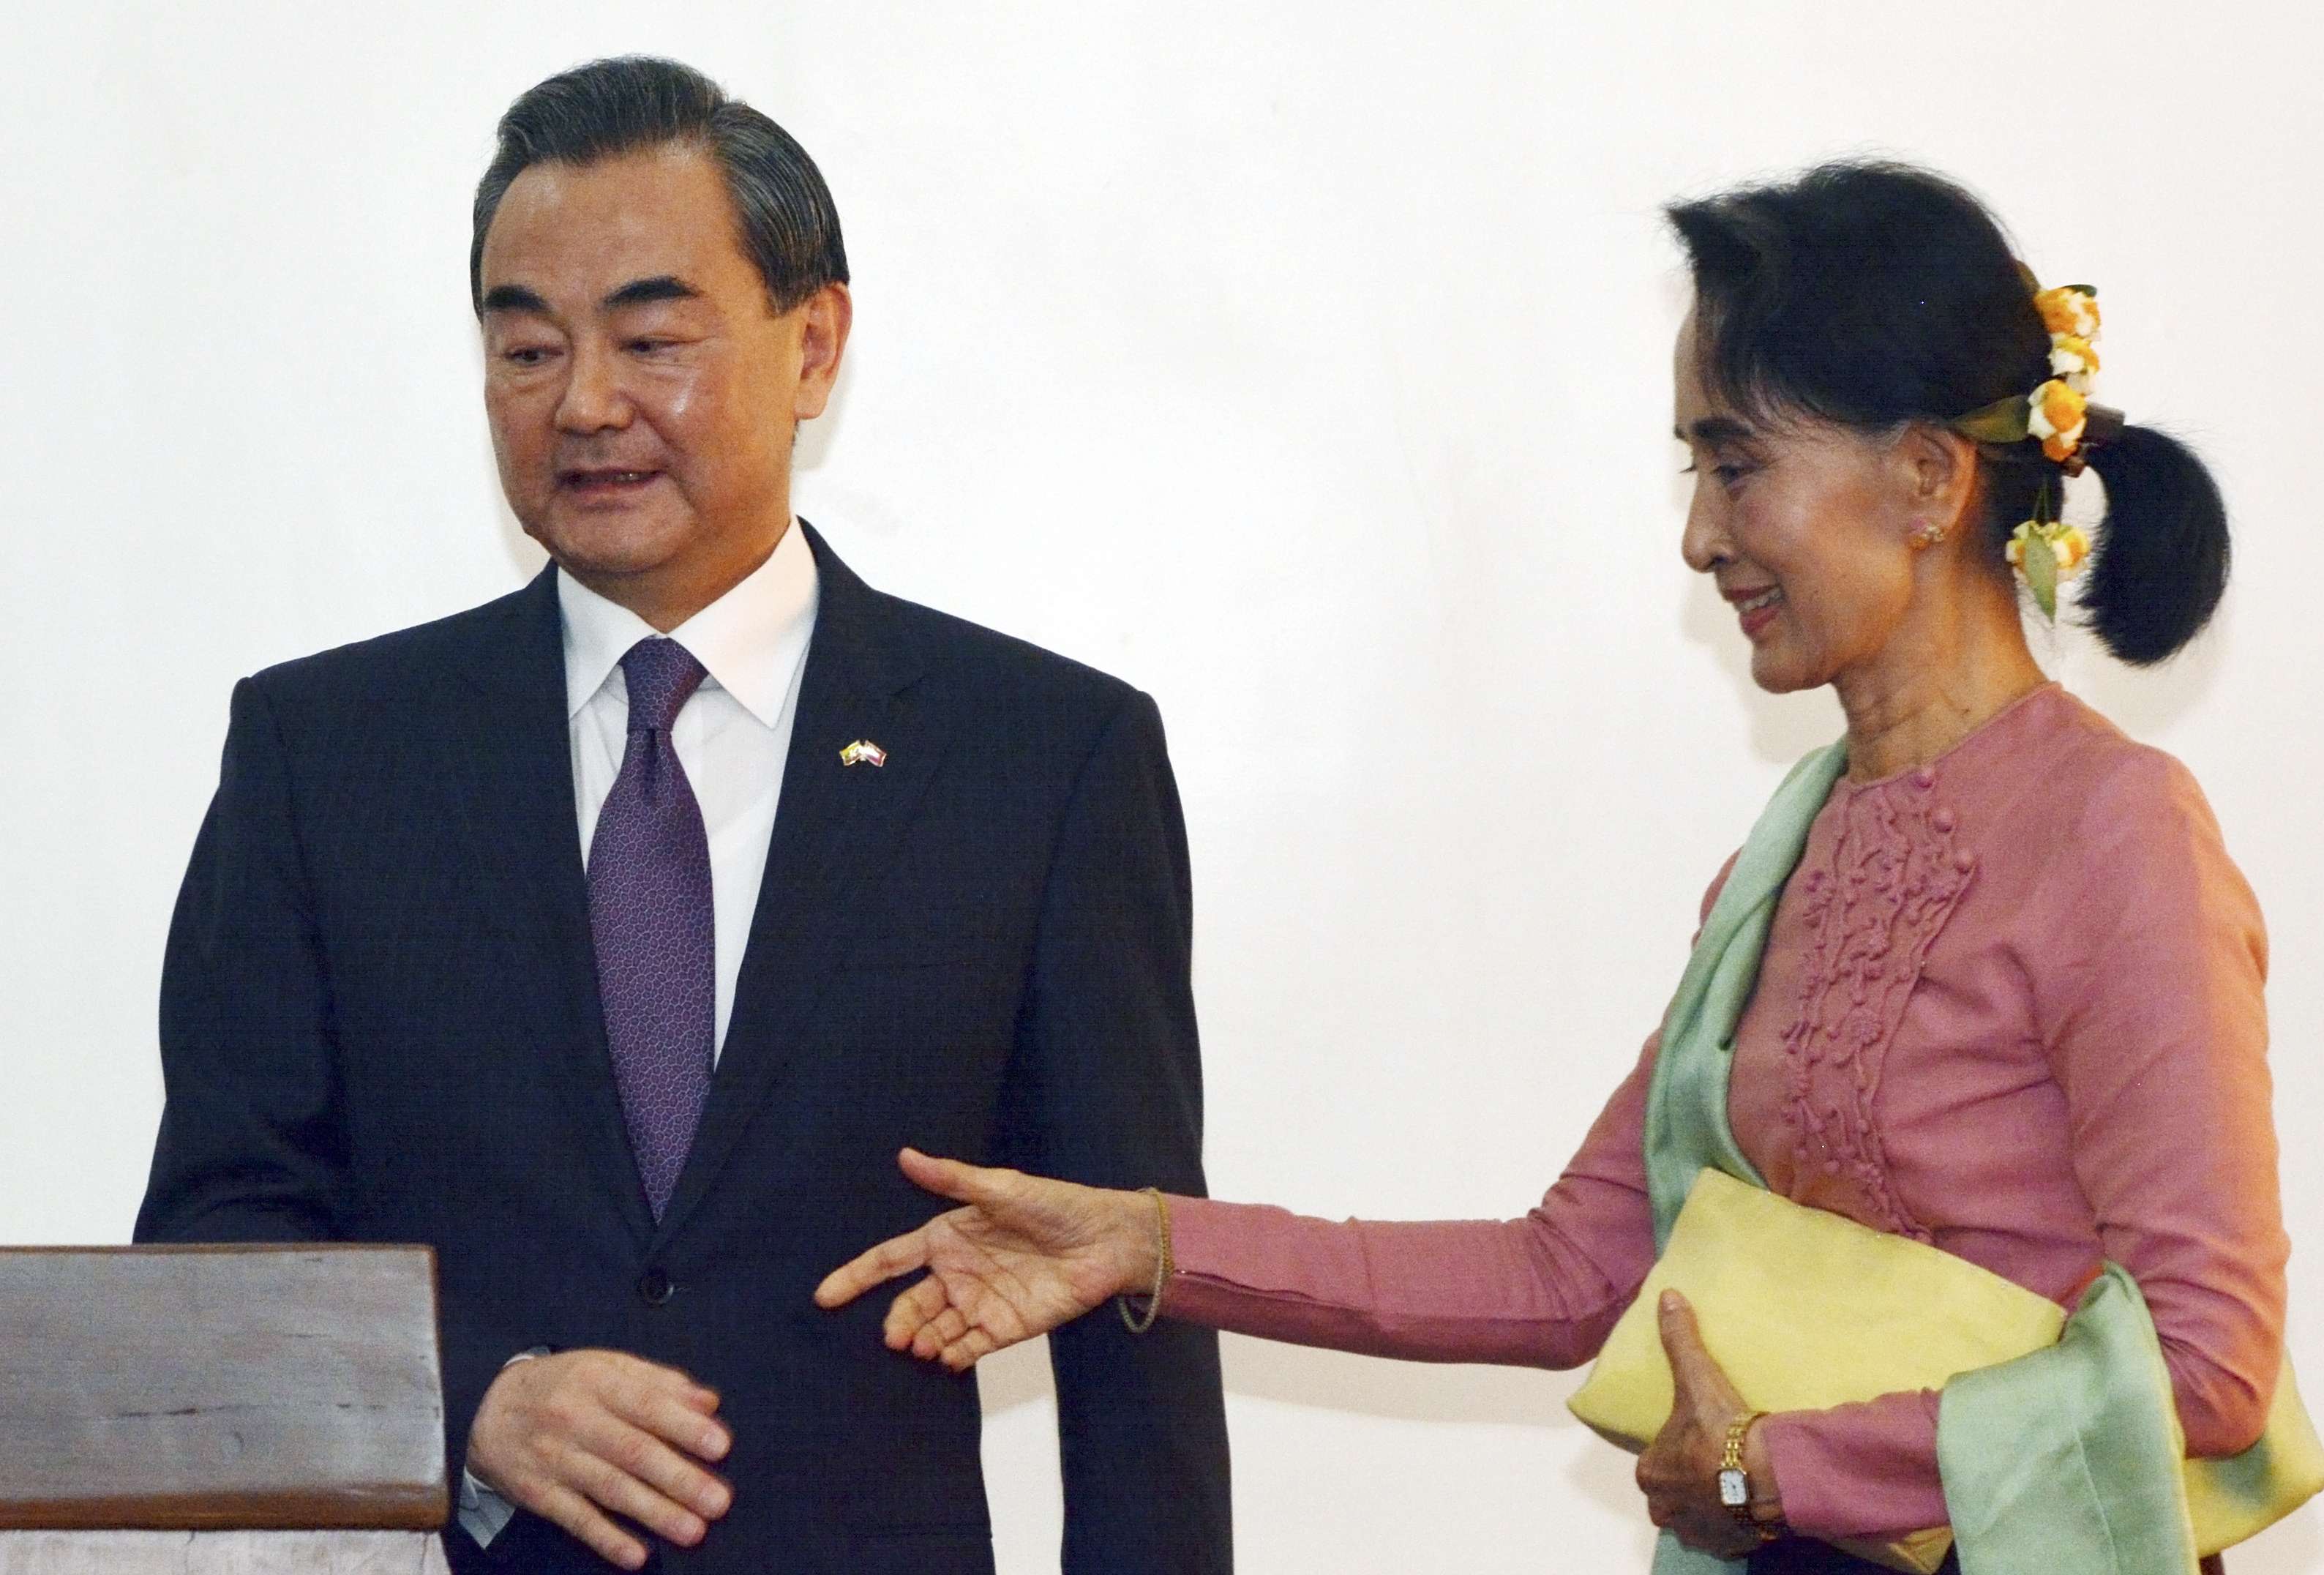 Wang Yi (left) pictured with Myanmar’s Foreign Minister Aung San Suu Kyi during their press conference in Naypyidaw. Photo: AP